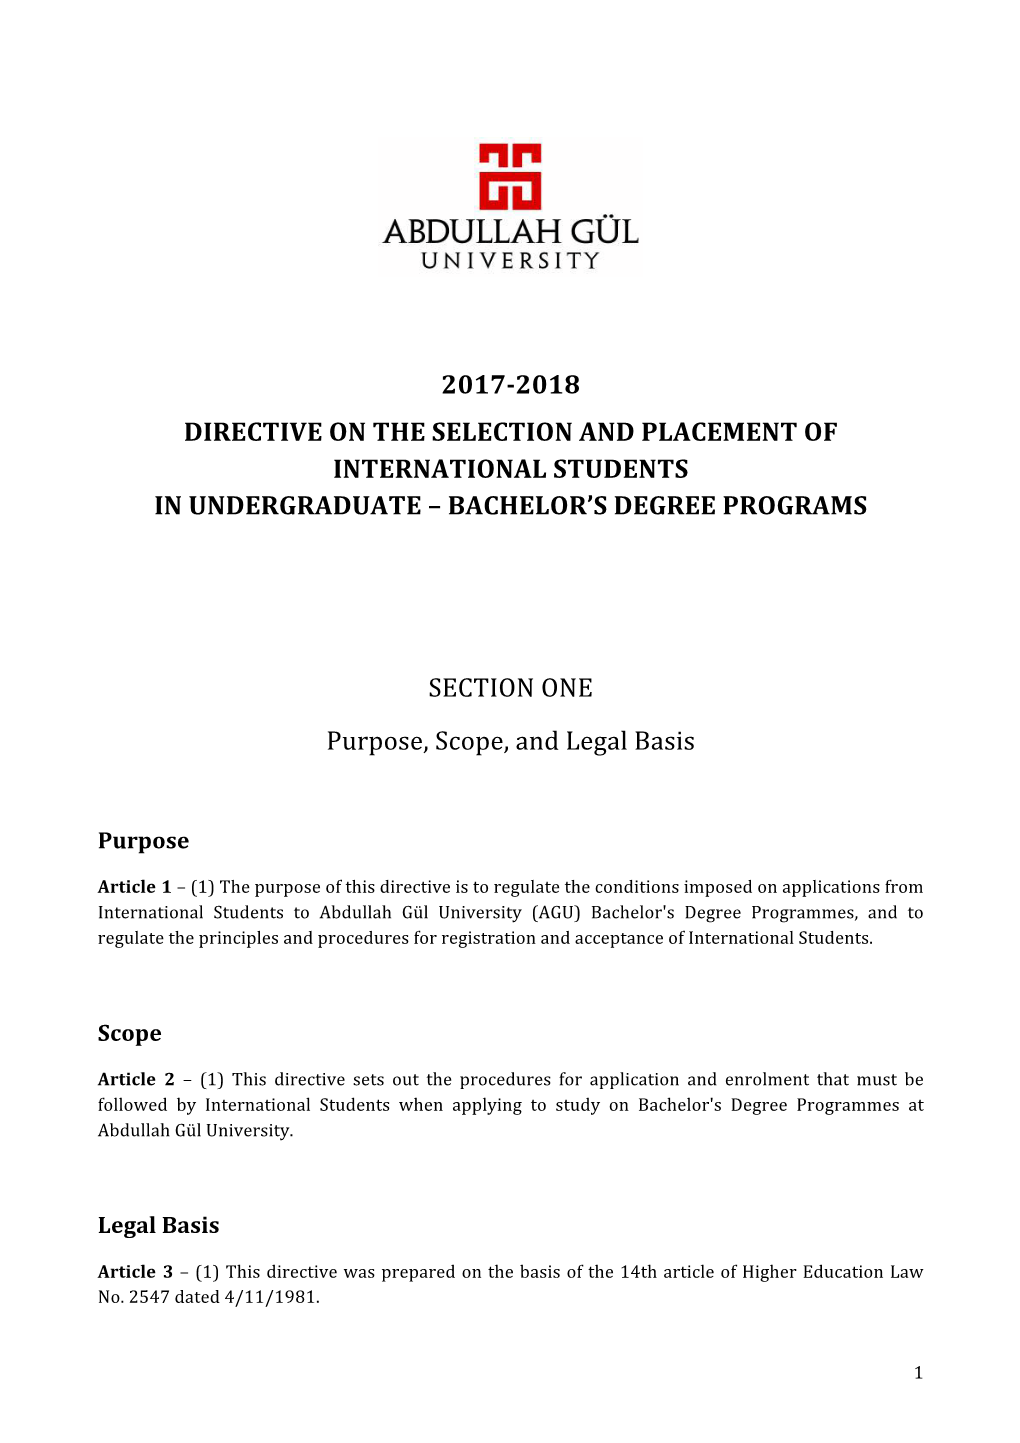 2017-2018 Directive on the Selection and Placement of International Students in Undergraduate – Bachelor’S Degree Programs